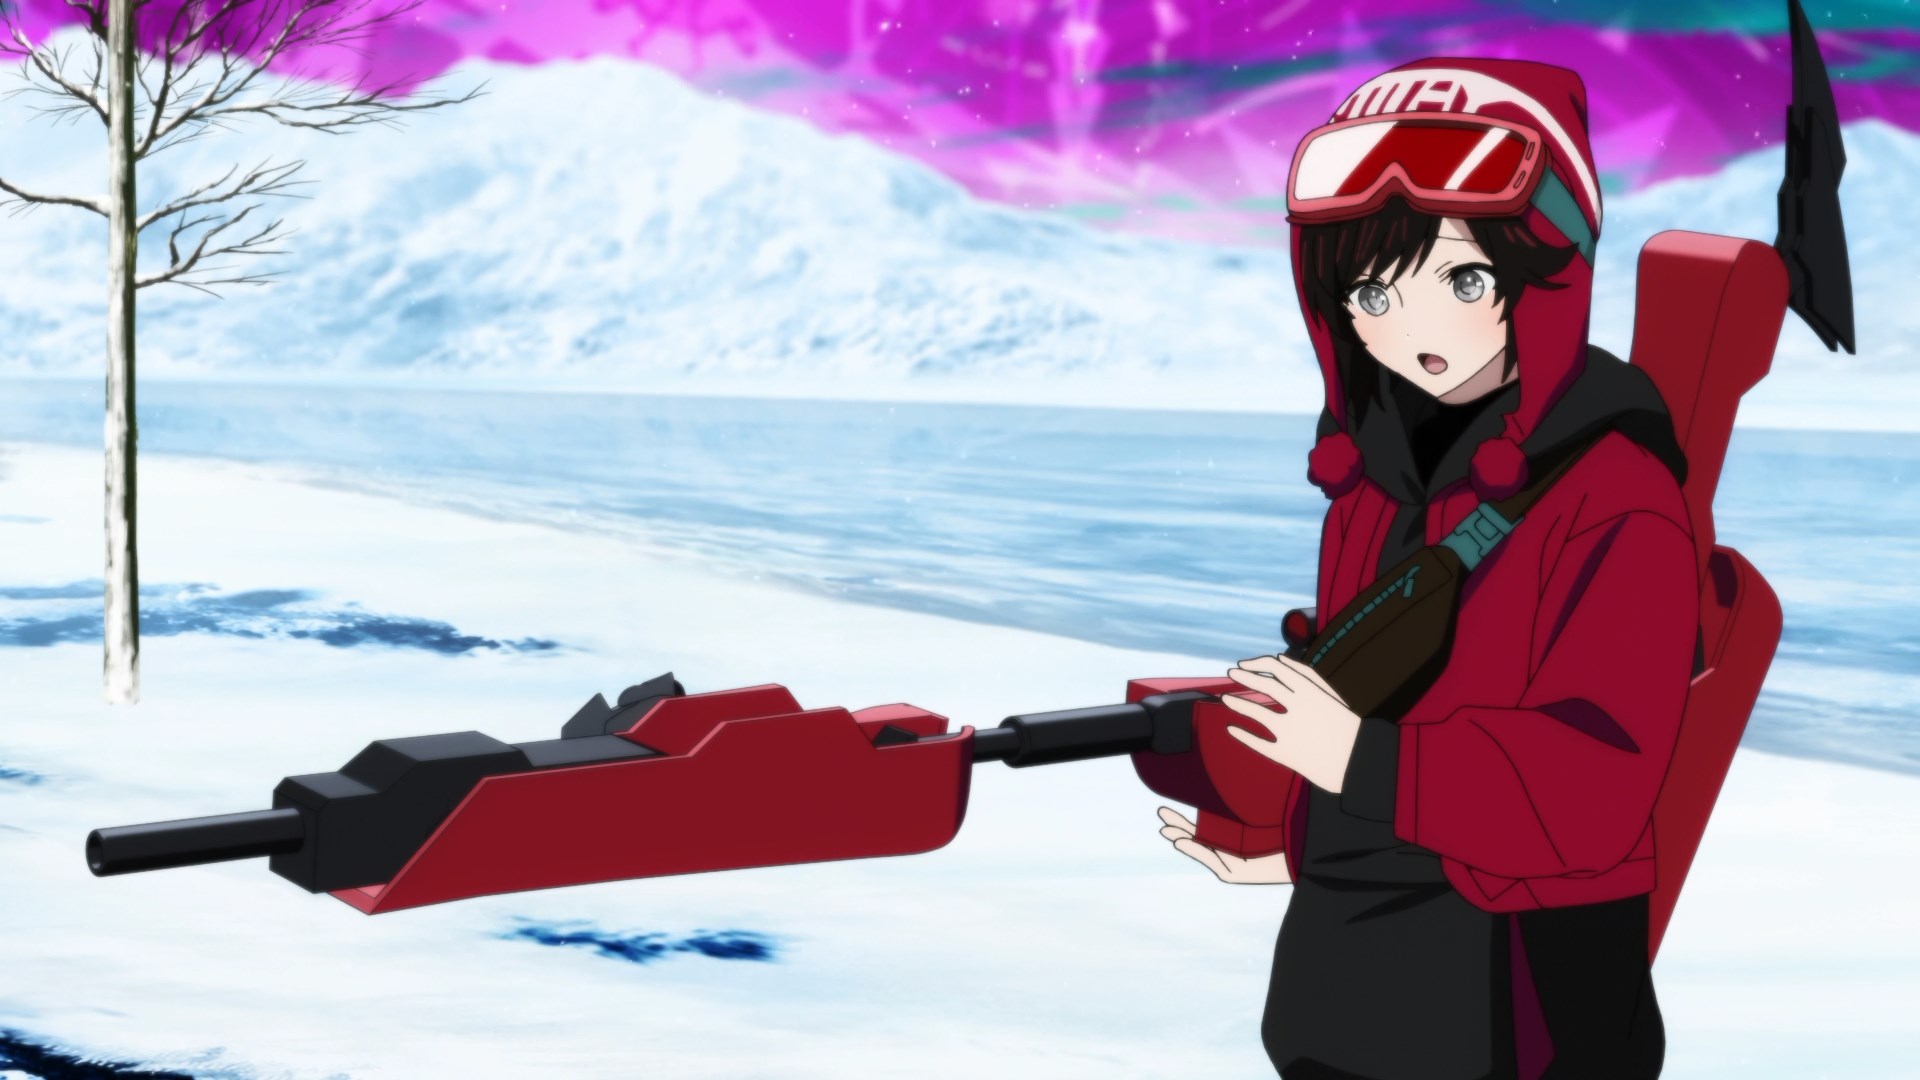 Ruby wonders why Weiss got her weapon function wrong